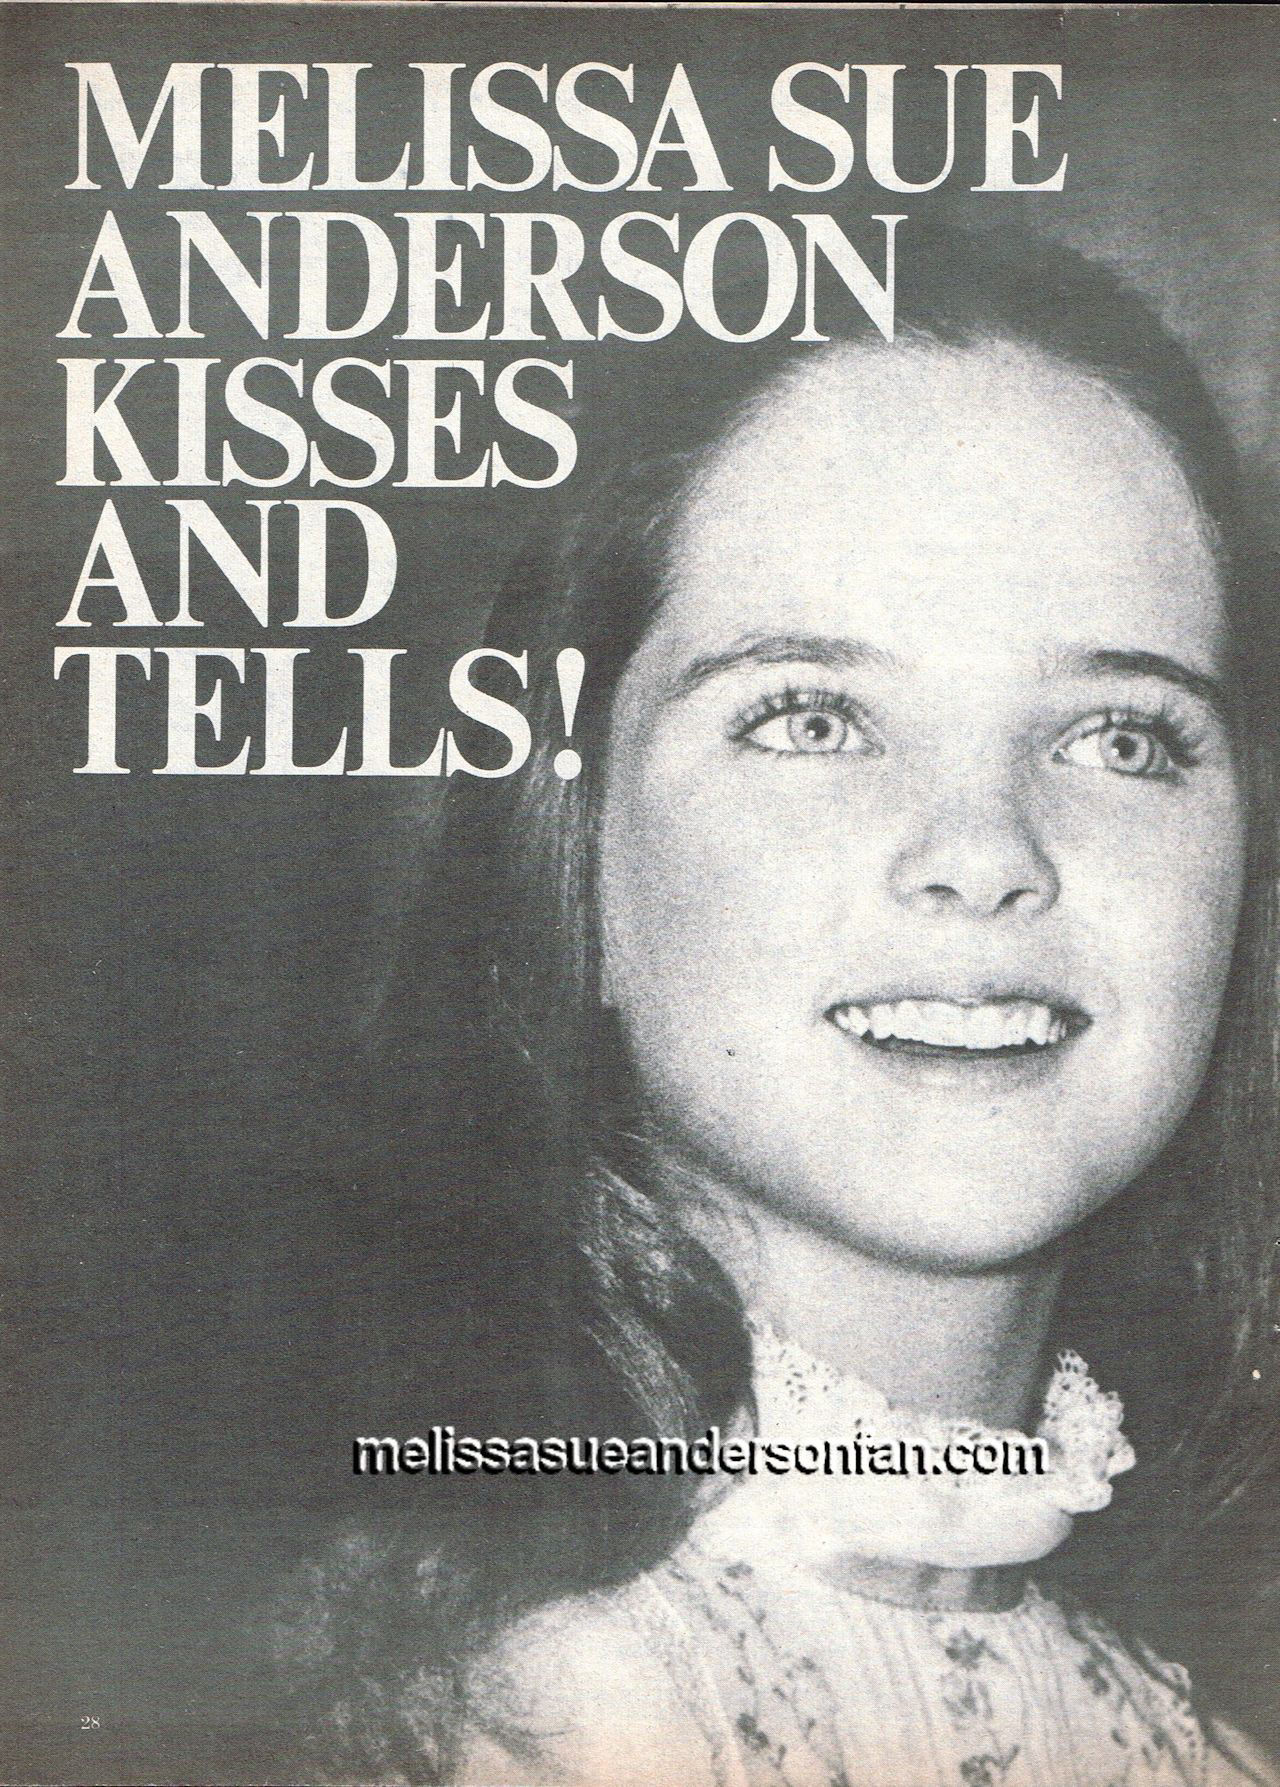 Melissa Sue Anderson kisses and tells!